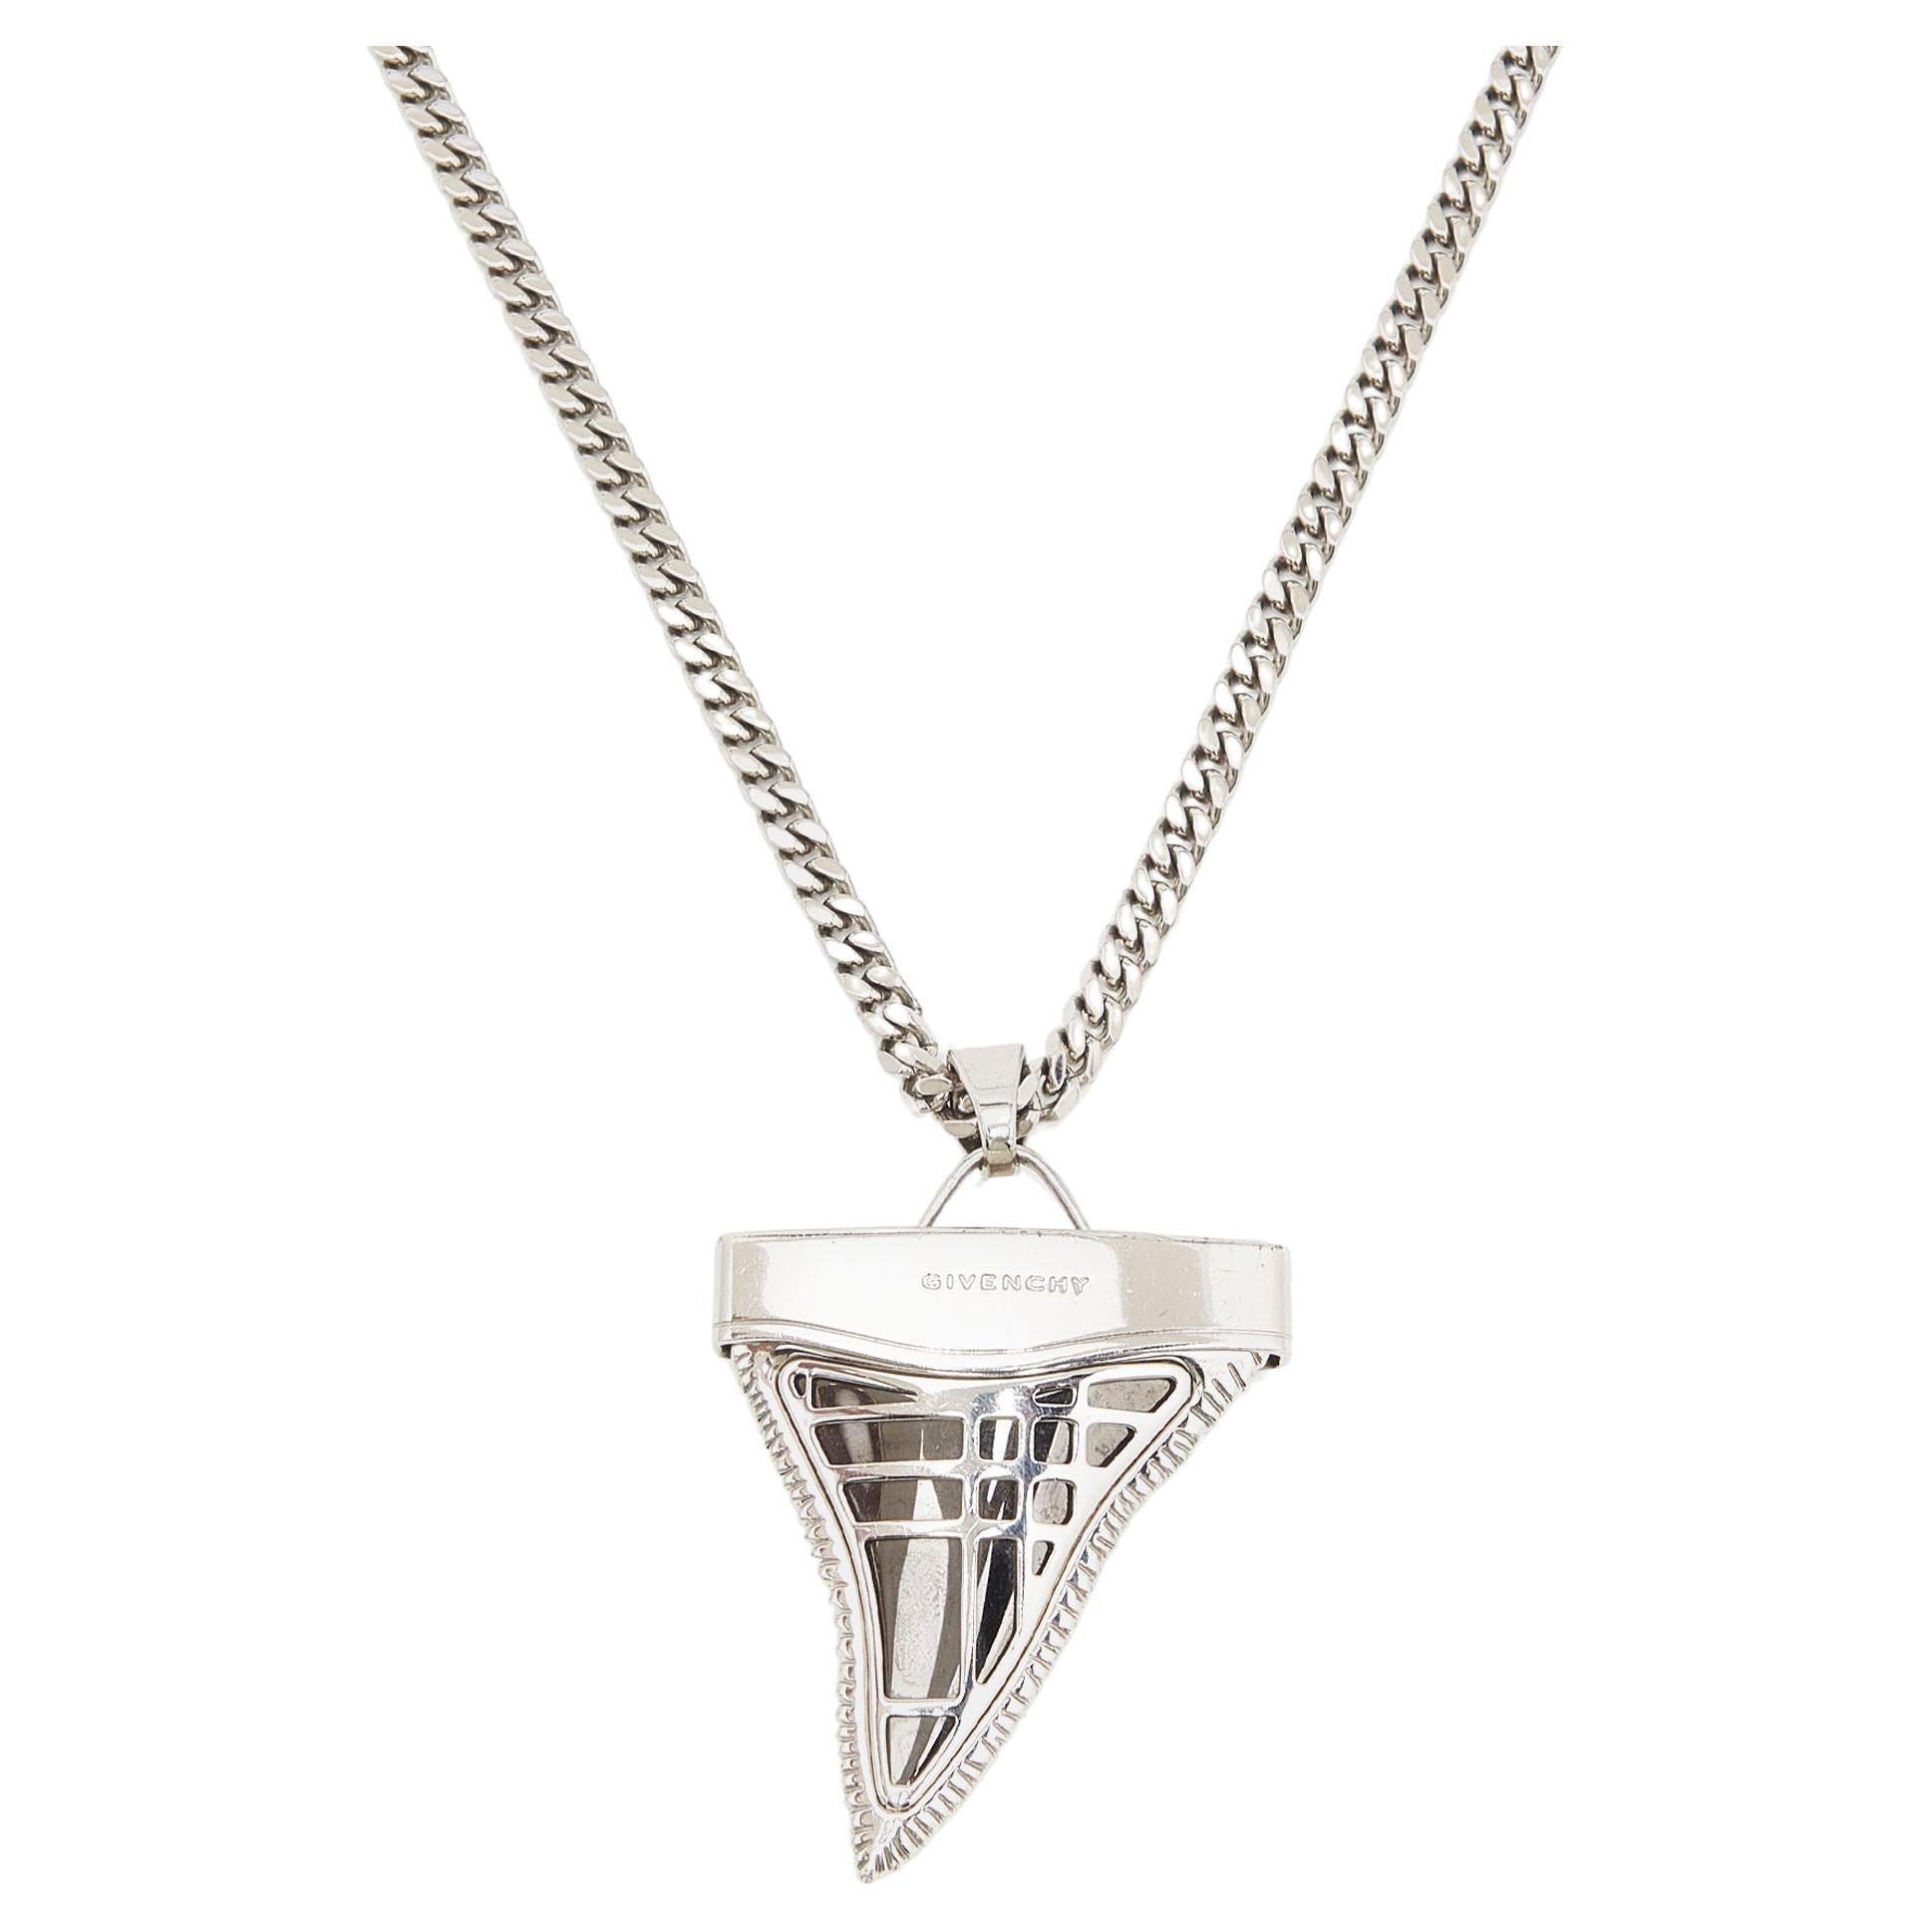 Givenchy Shark Tooth Two Tone Pendant Necklace